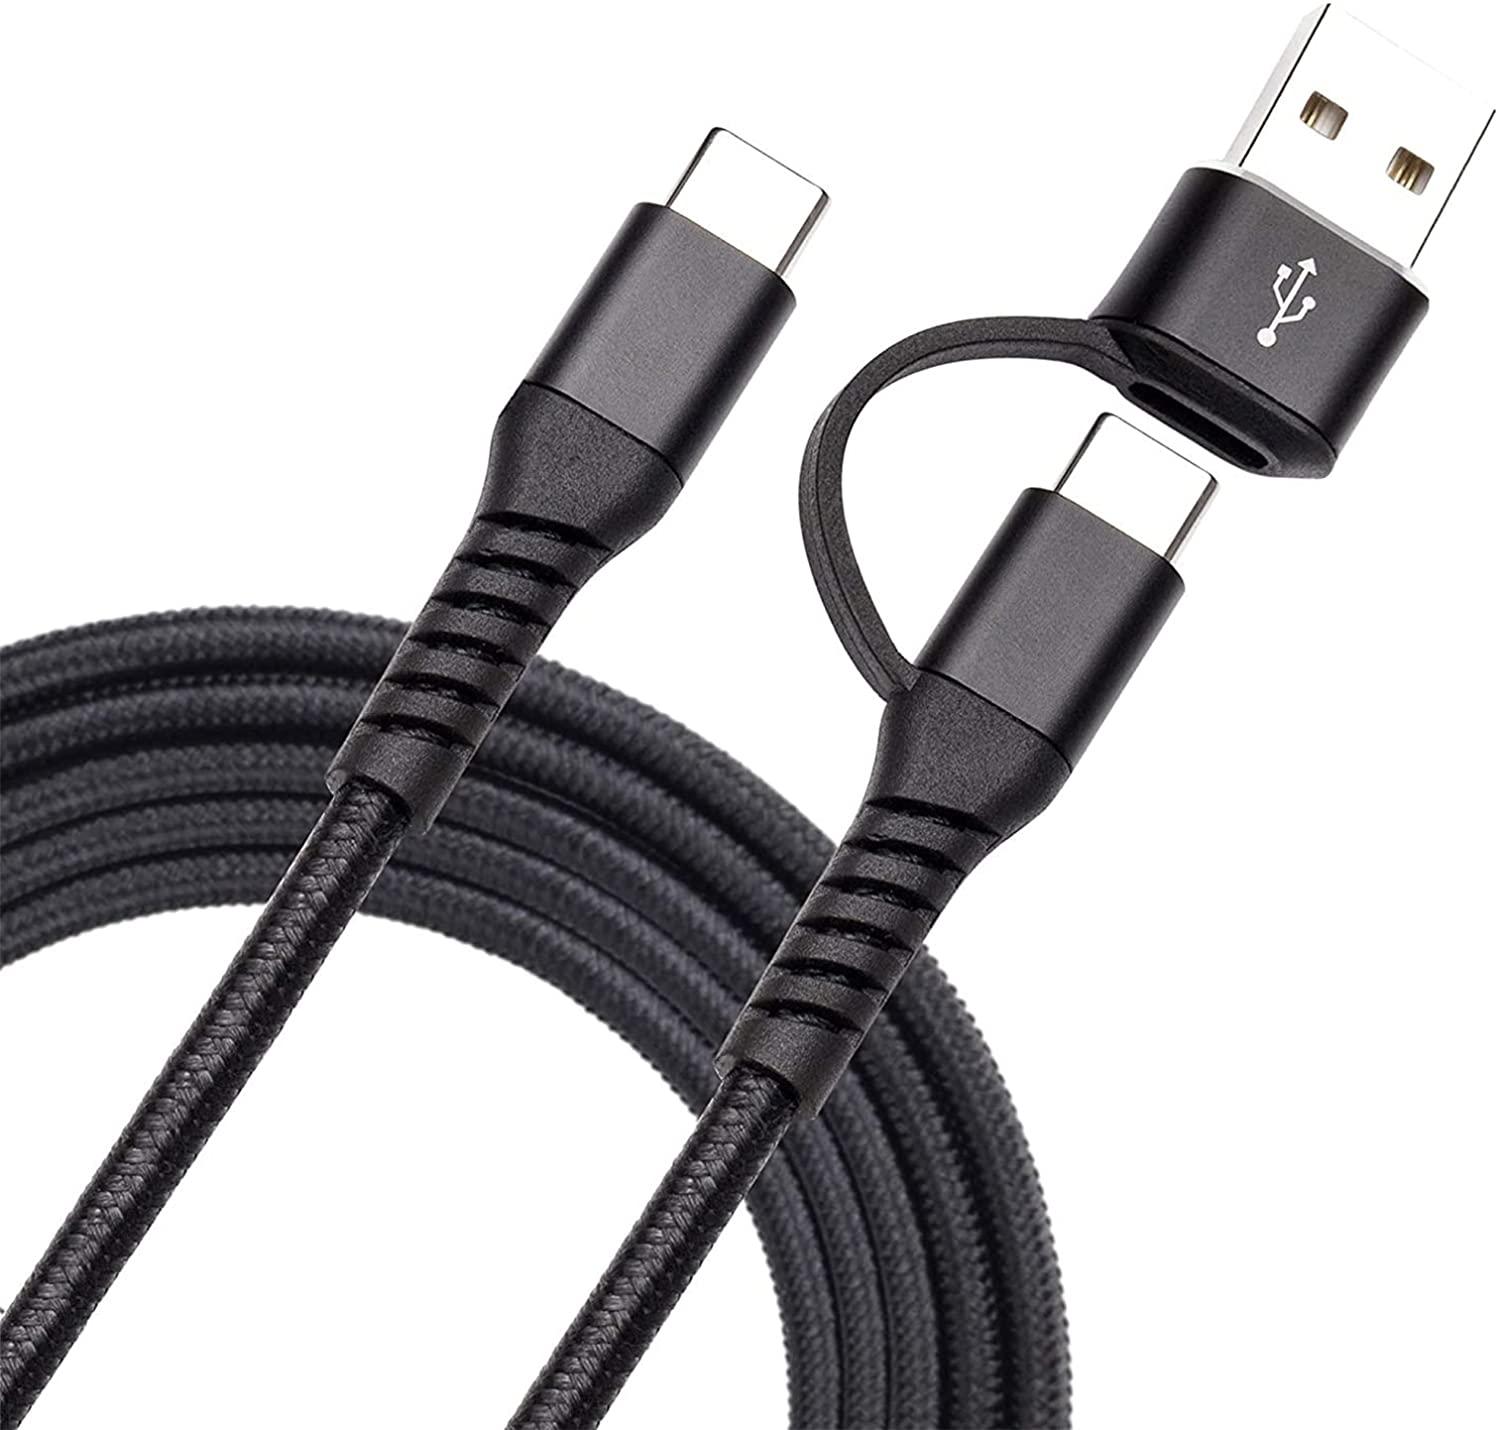 10ft USB-C to USB or USB-C Cable for $6.99